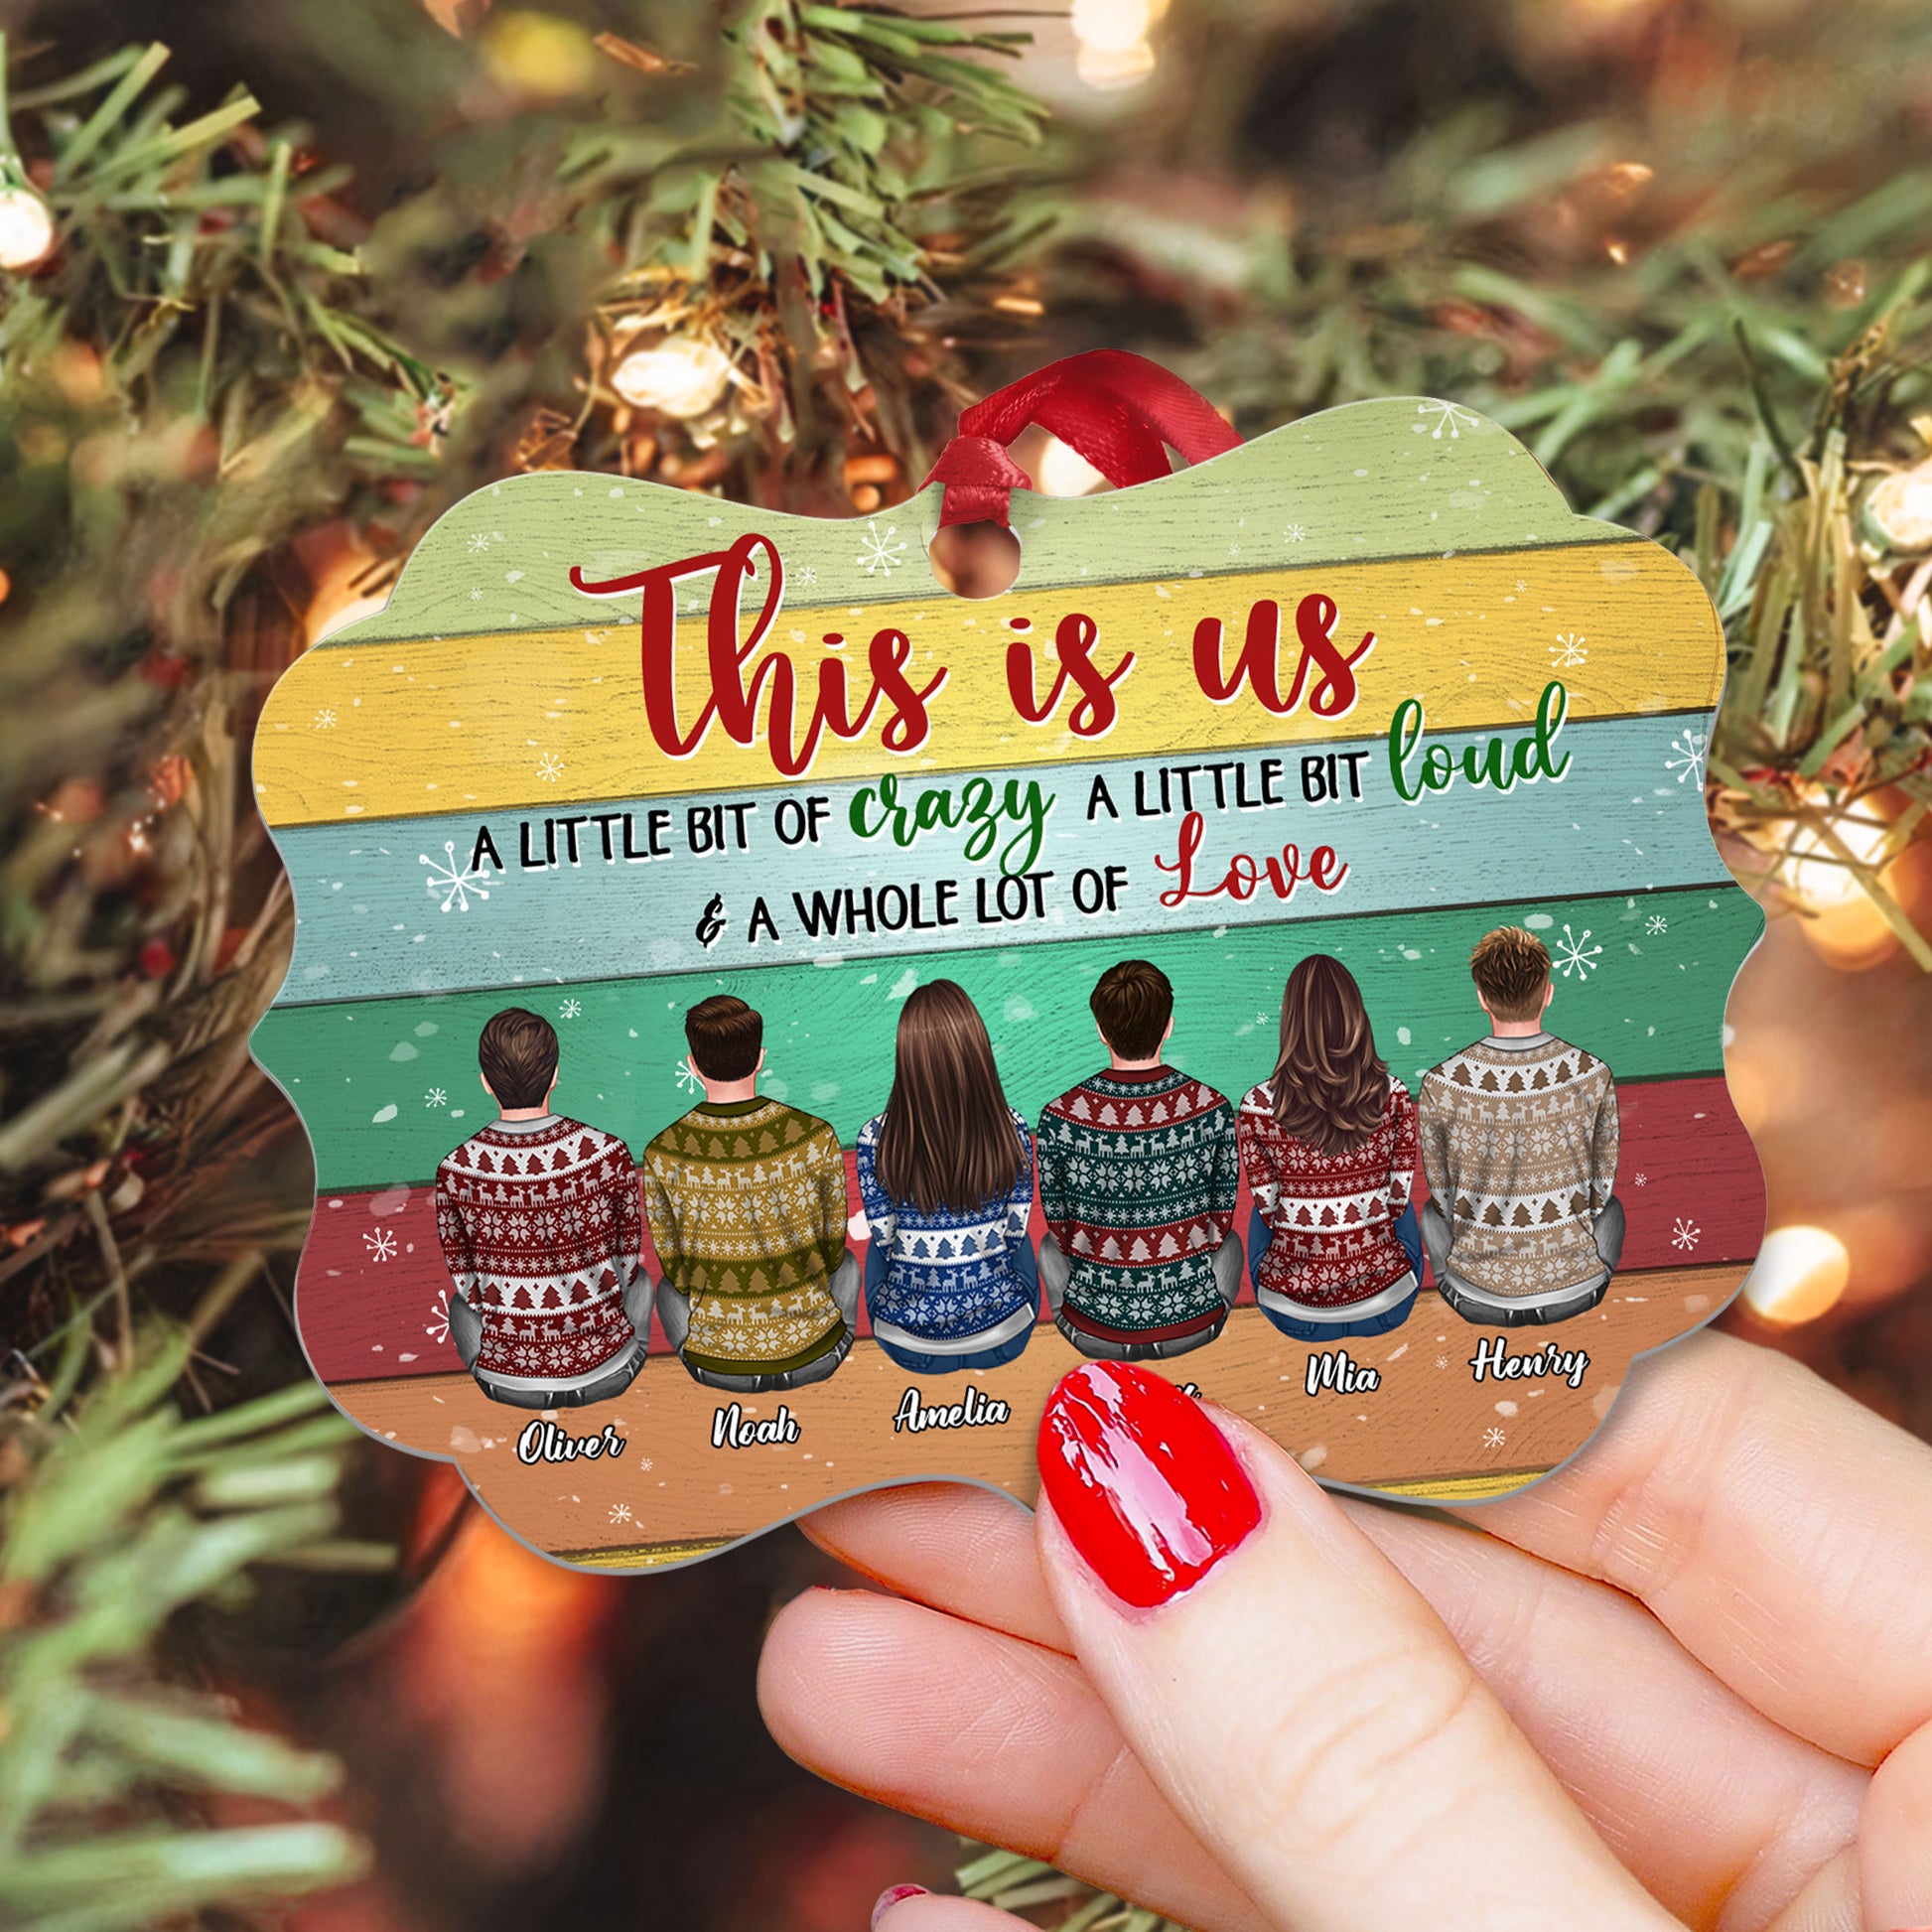 This Is Us A Little Bit Crazy - Personalized Aluminum Ornament - Christmas Gift Family Ornament For Besties, Siblings